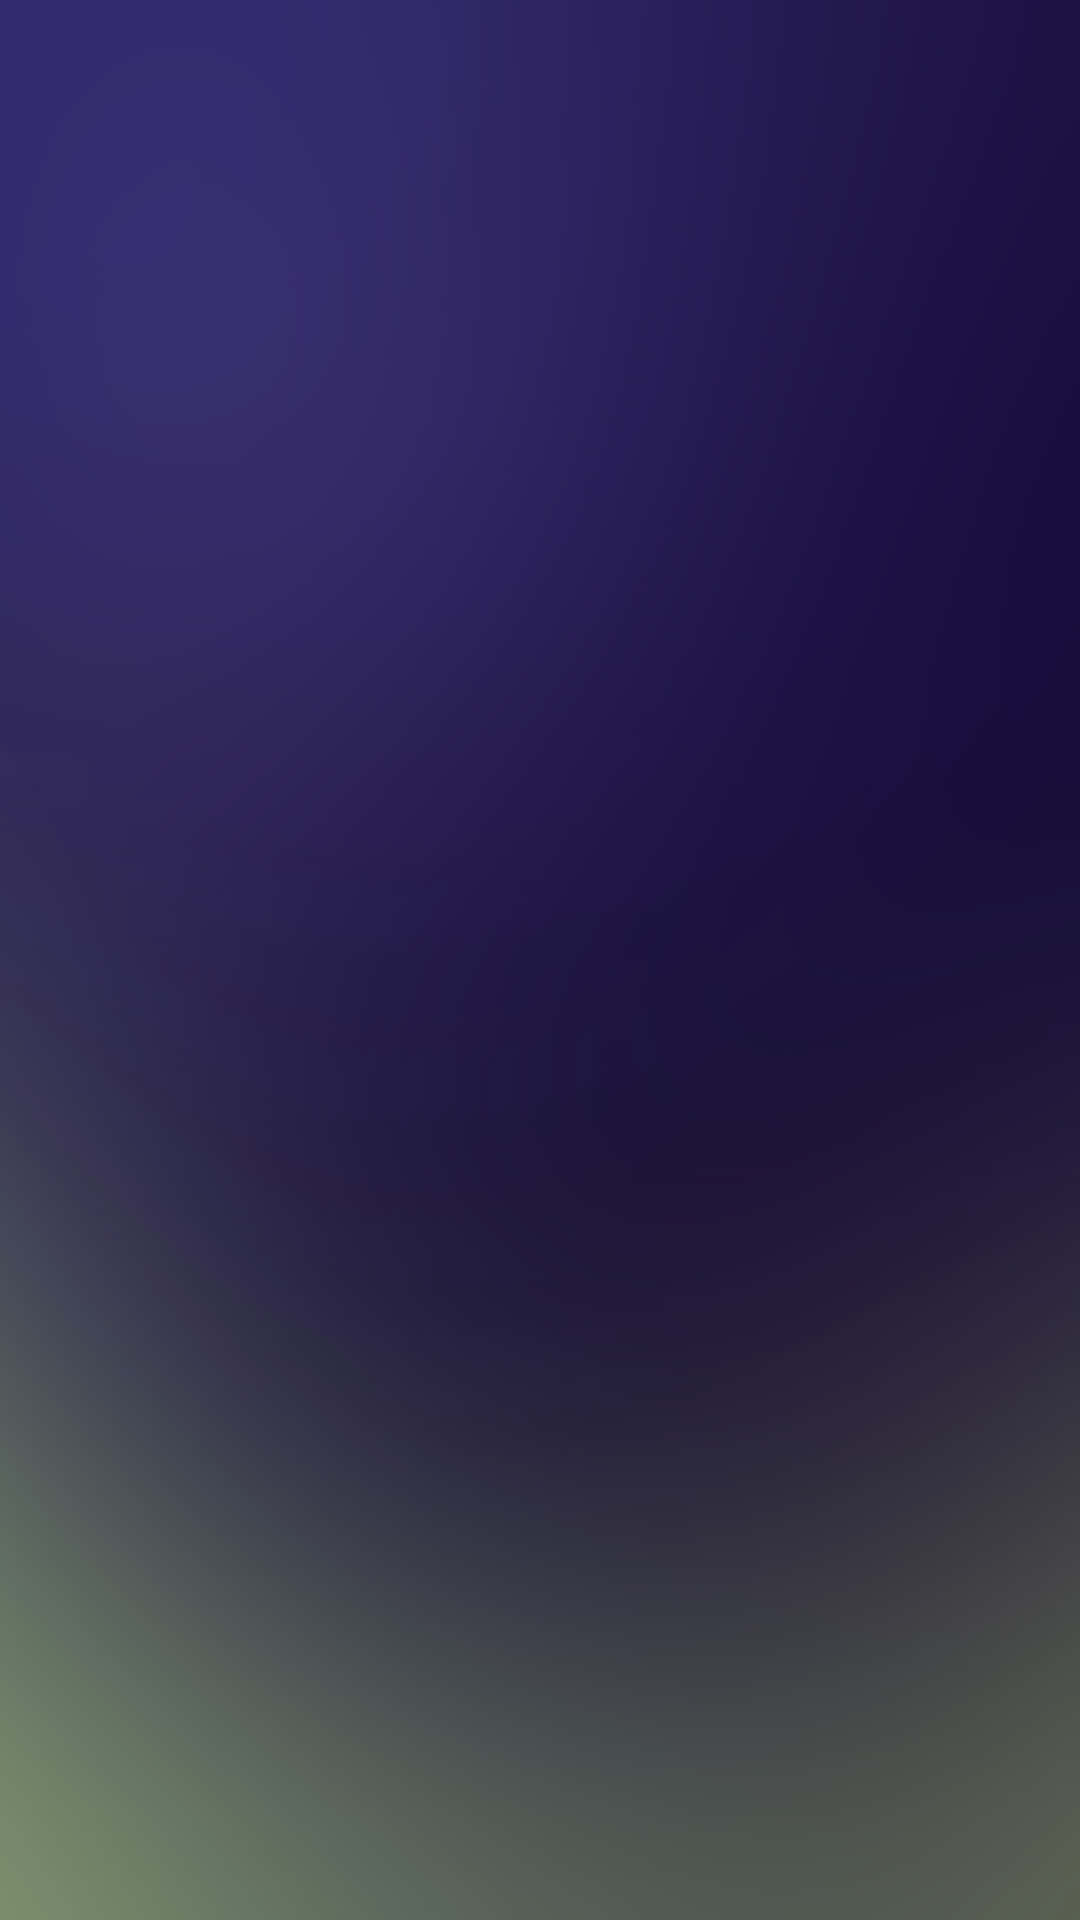 Dark Gradient With Green And Purple Wallpaper